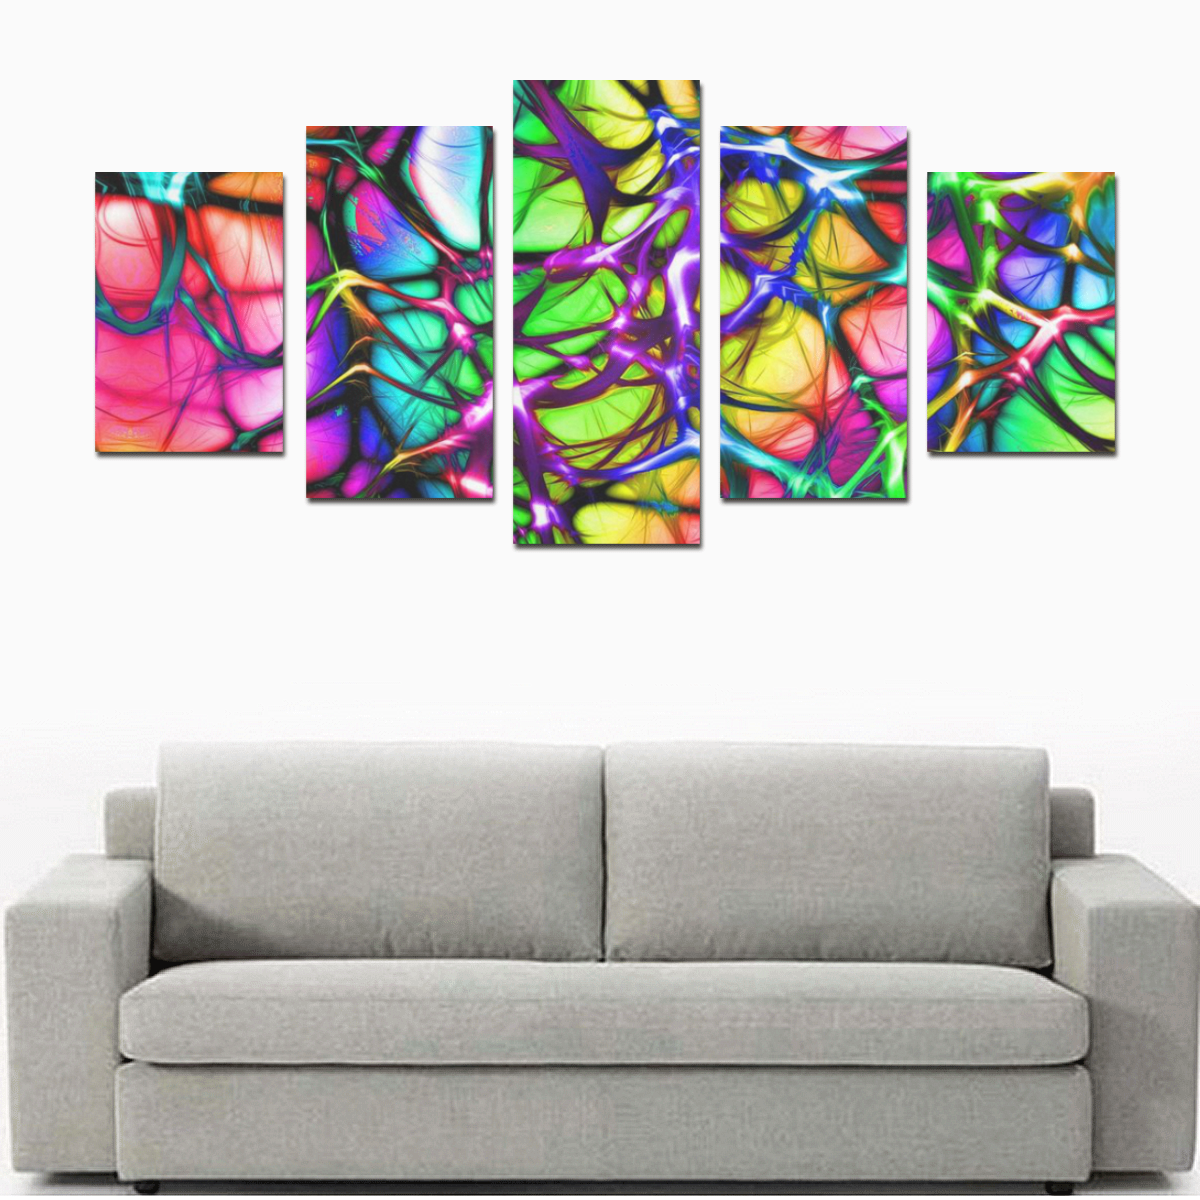 alive 5 (abstract) by JamColors Canvas Print Sets D (No Frame)